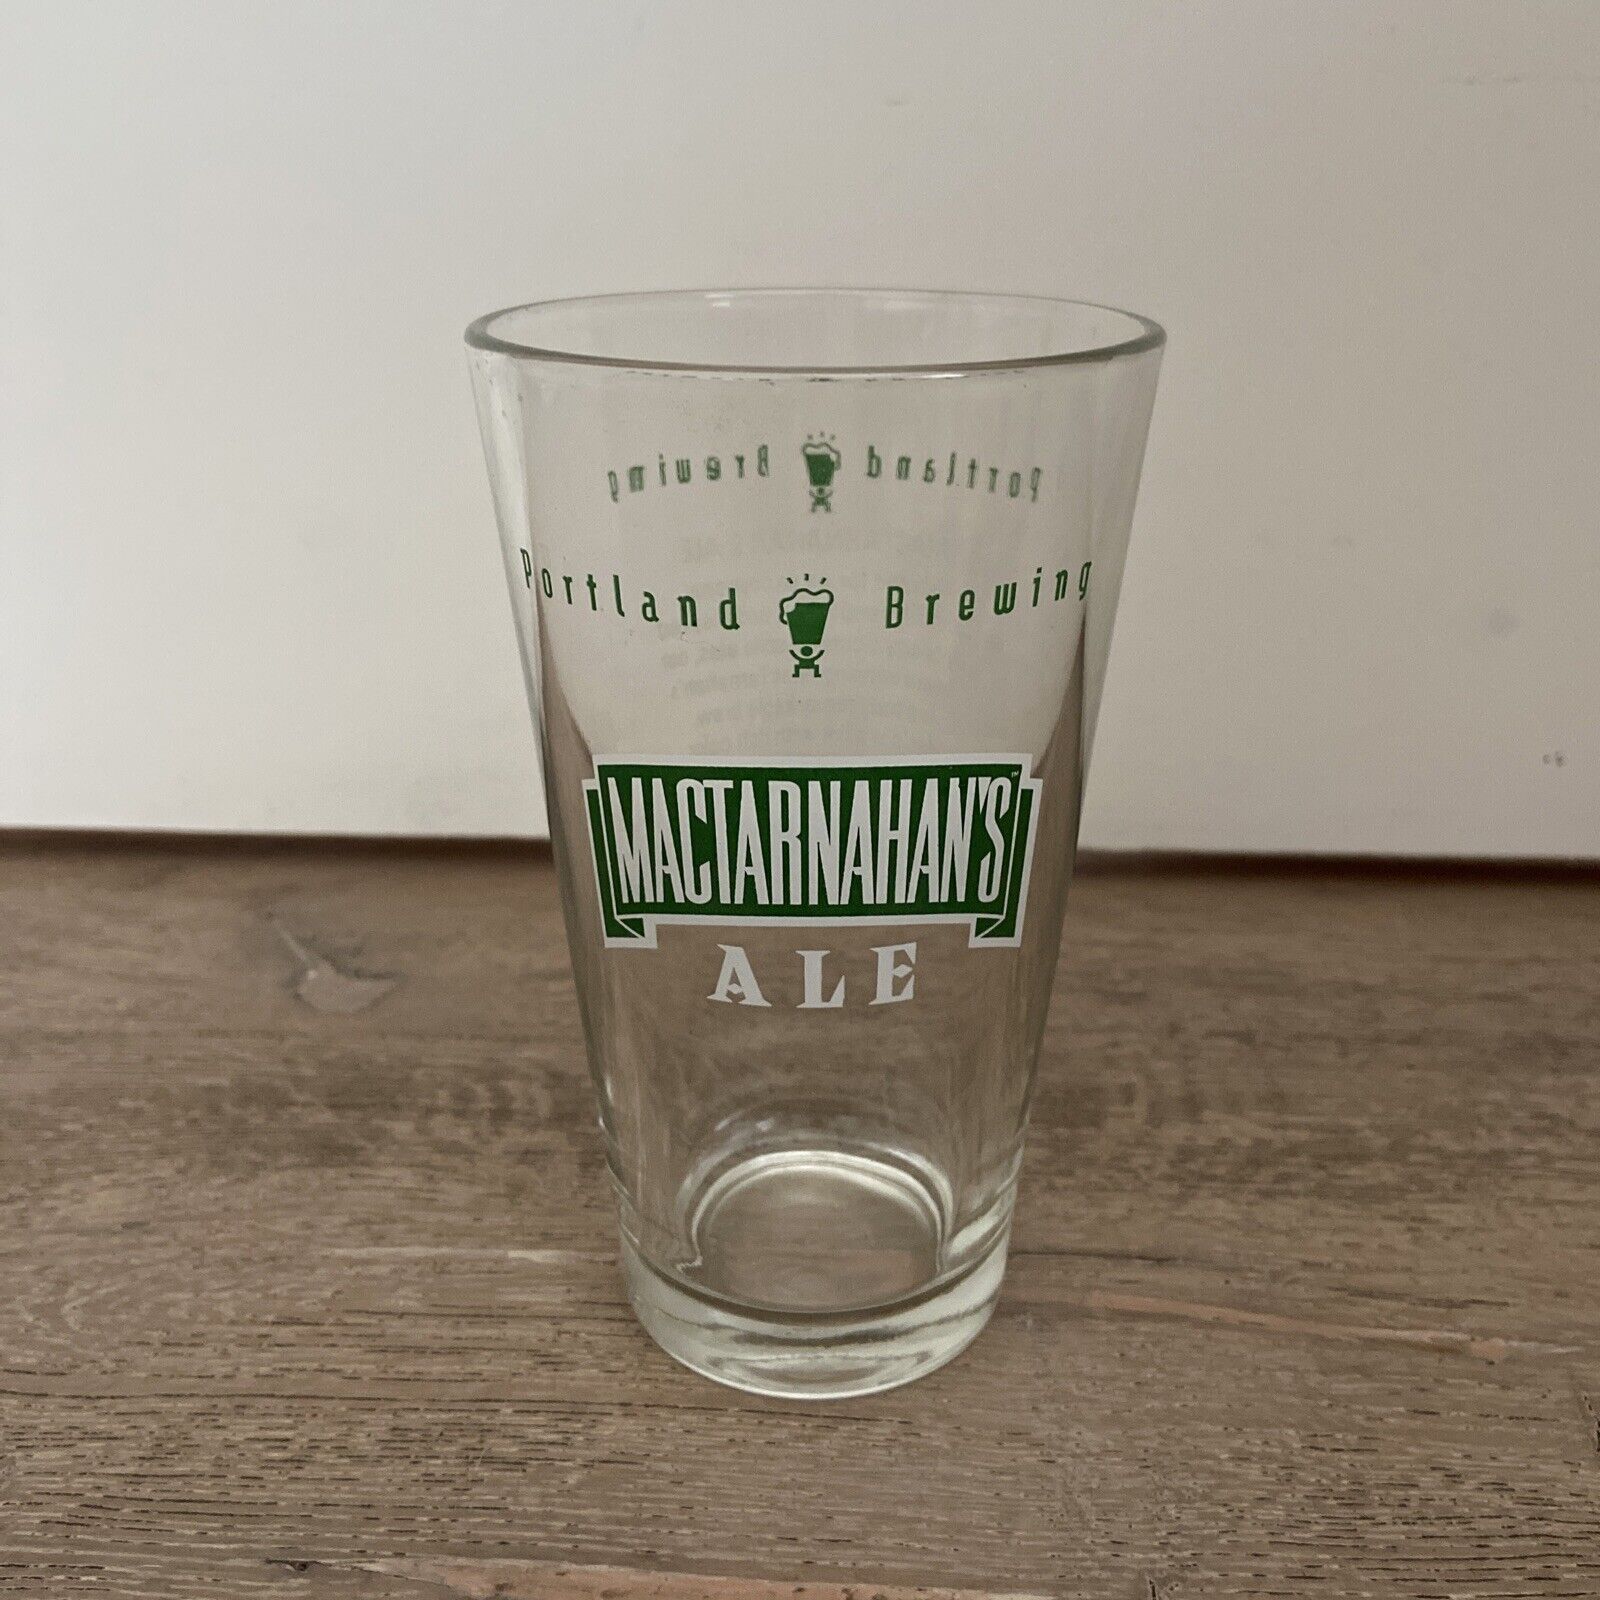 MacTARNAHAN’s Ale Pint Glass Portland Brewing Co. Retired Micro Brew Brand